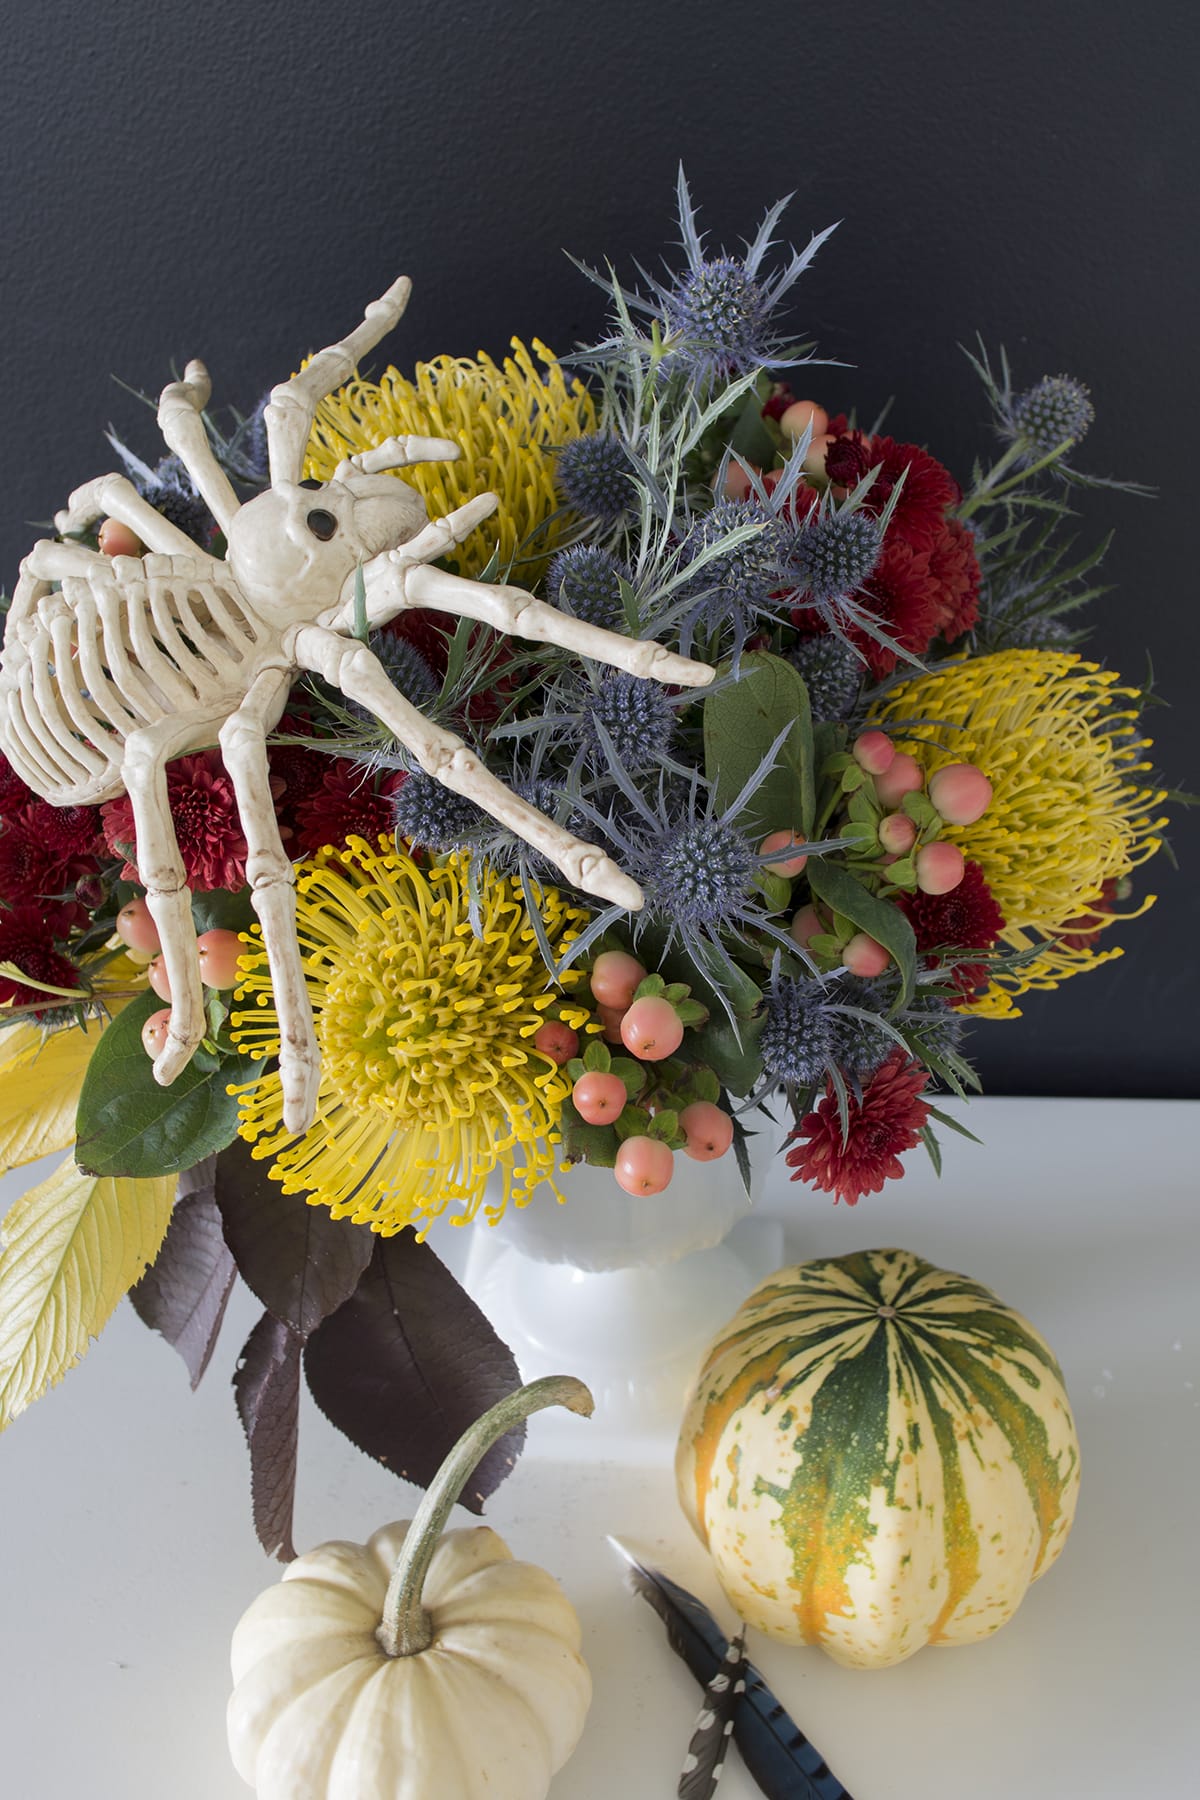 skeleton spider on top of vibrant colored fall arrangement with maroon chock cherry leaves, berries, dark red mums and pumkins with added larger skeleton spider for vibrant colored fall arrangement with maroon chock cherry leaves, berries, dark red mums and pumkins